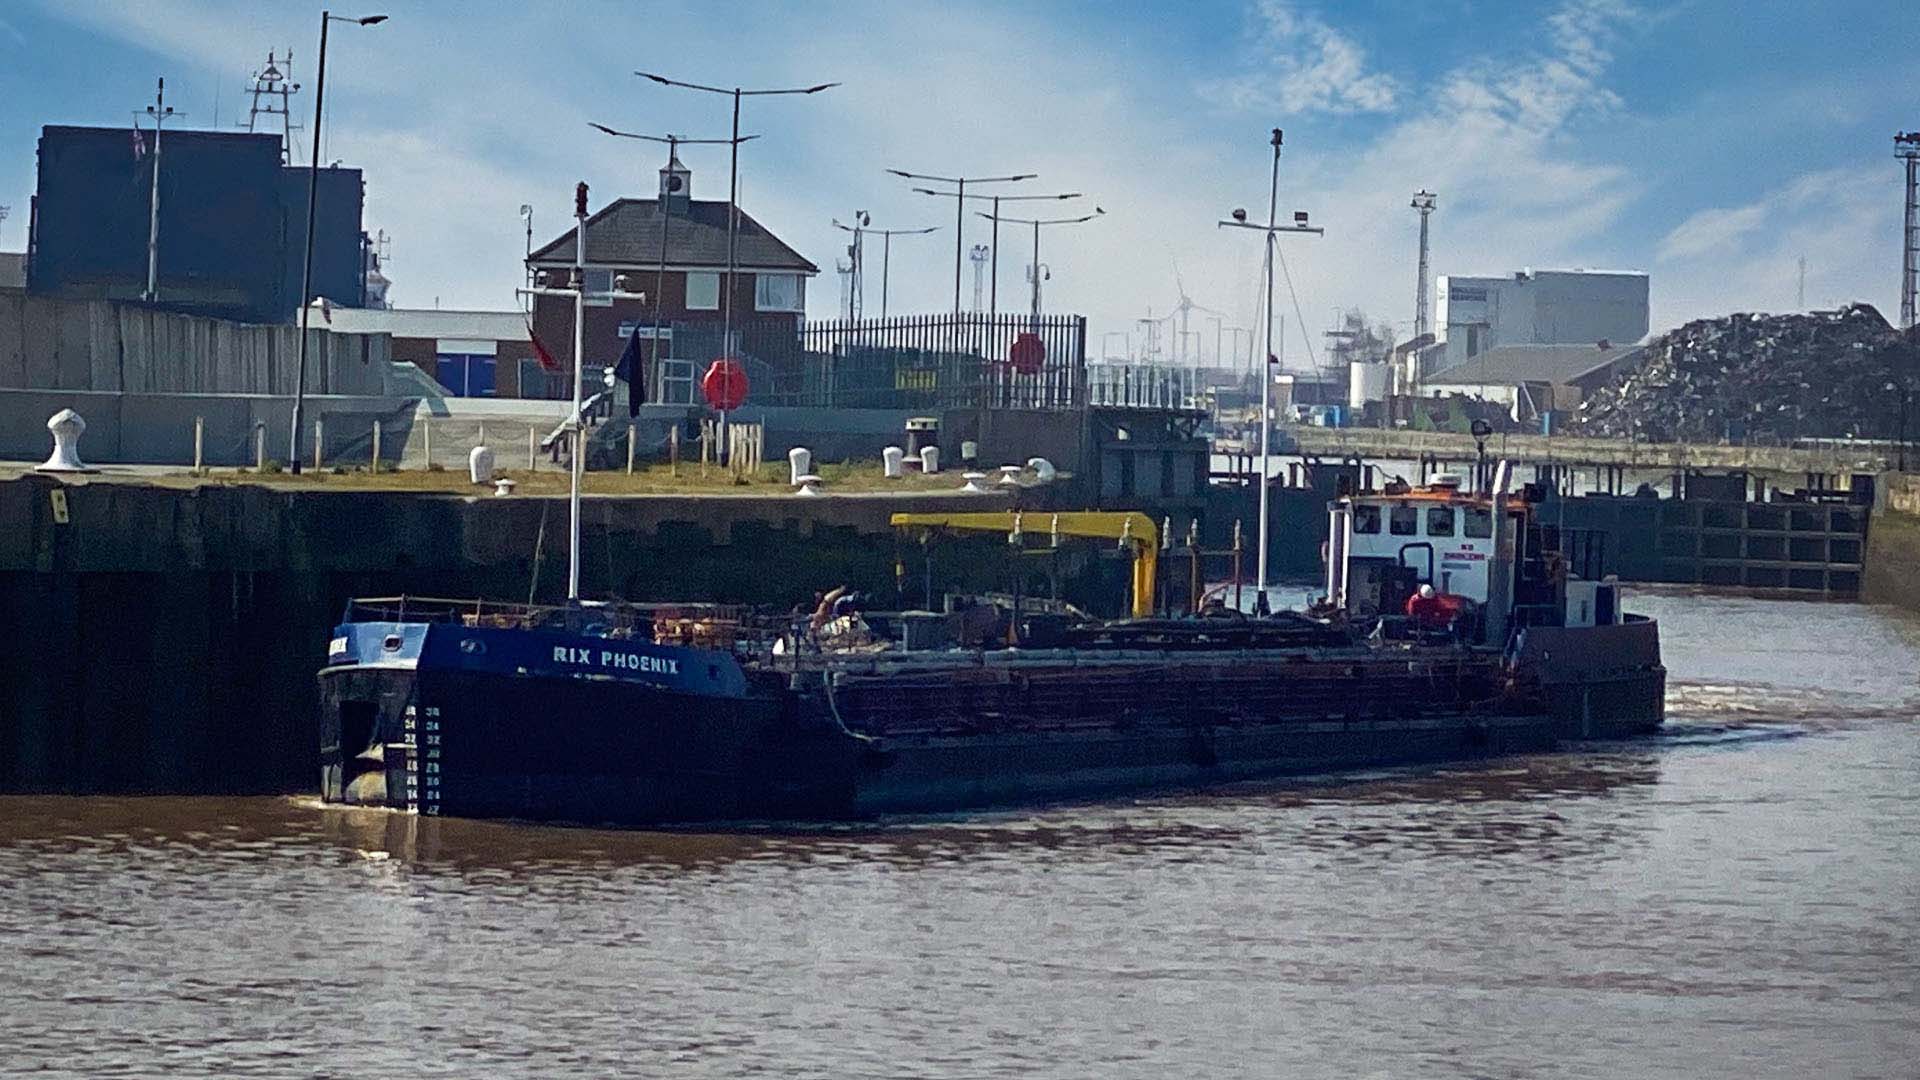 Rix Phoenix departing Albert Dock, Hull on route its next fuel bunkering appointment.